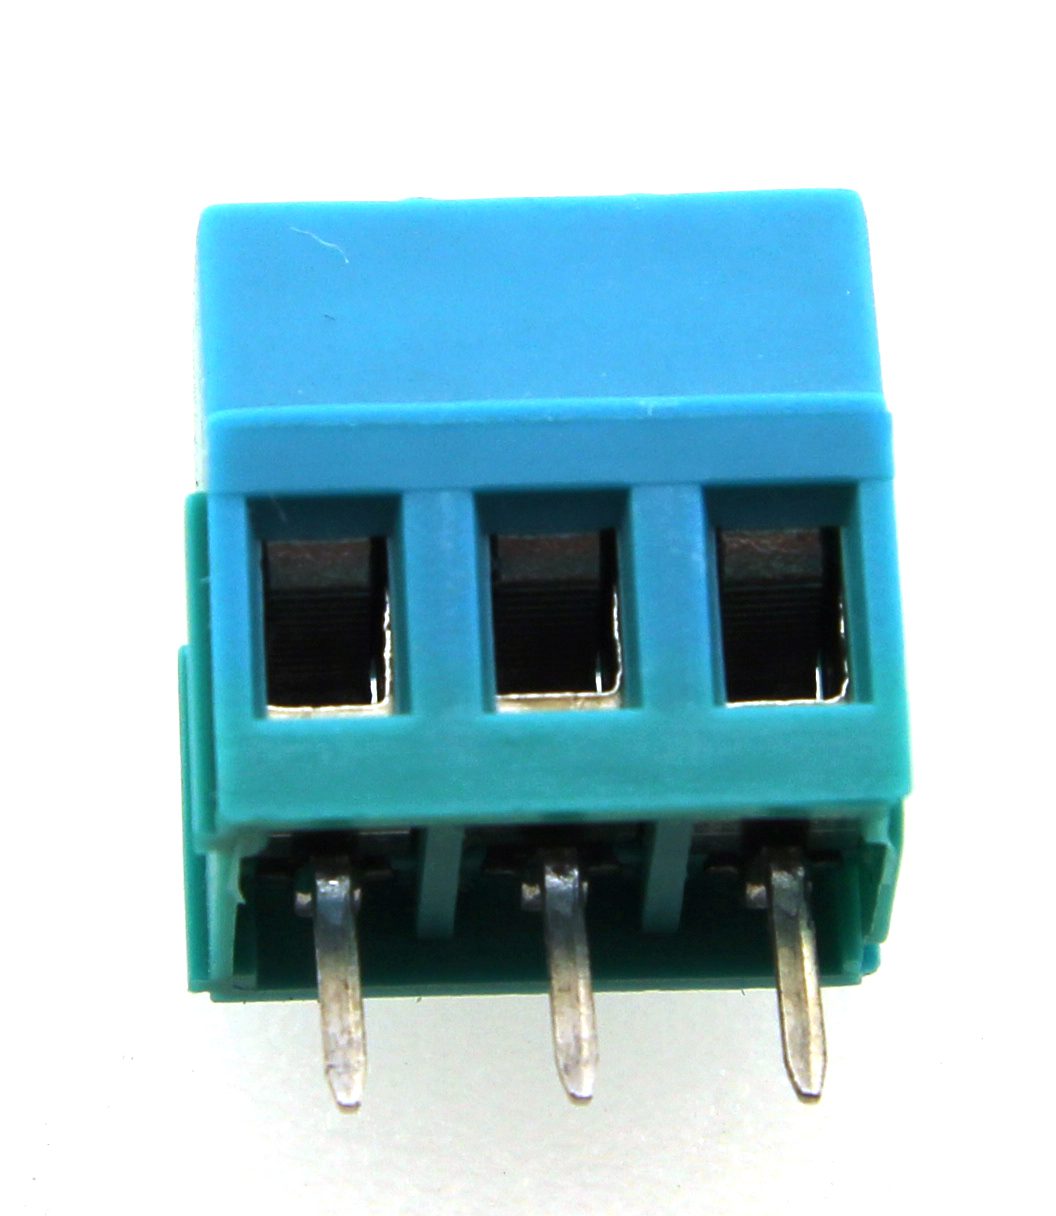 Terminal for printed circuit boards